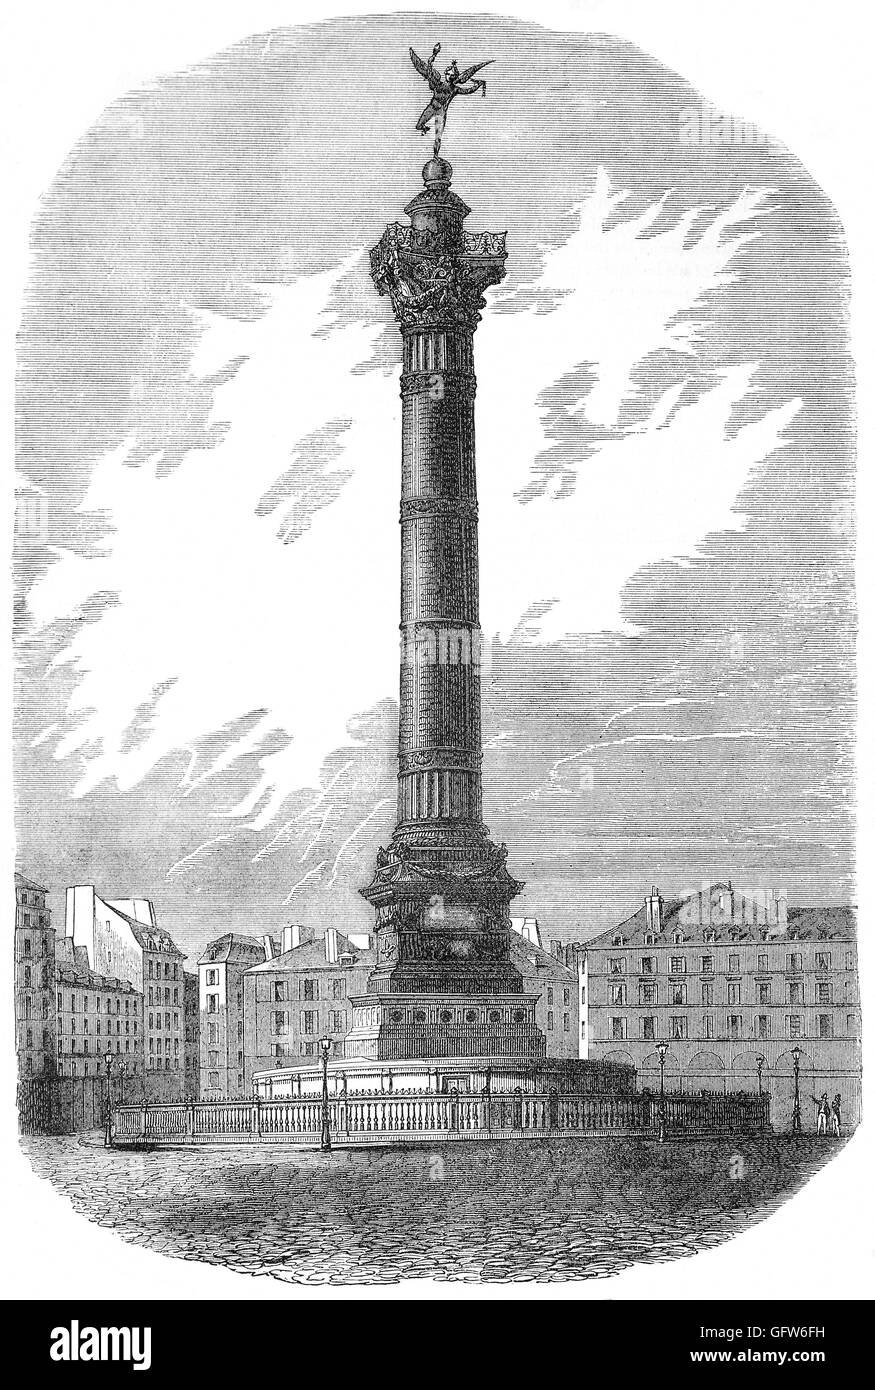 The July Column is a monumental column in Paris commemorating the Revolution of 1830. It stands in the center of the Place de la Bastille and celebrates the Trois Glorieuses — the 'three glorious' days of 27–29 July 1830 that saw the fall of King Charles X of France and the commencement of the 'July Monarchy' of Louis-Philippe, King of the French. It was built between 1835 and 1840. Stock Photo